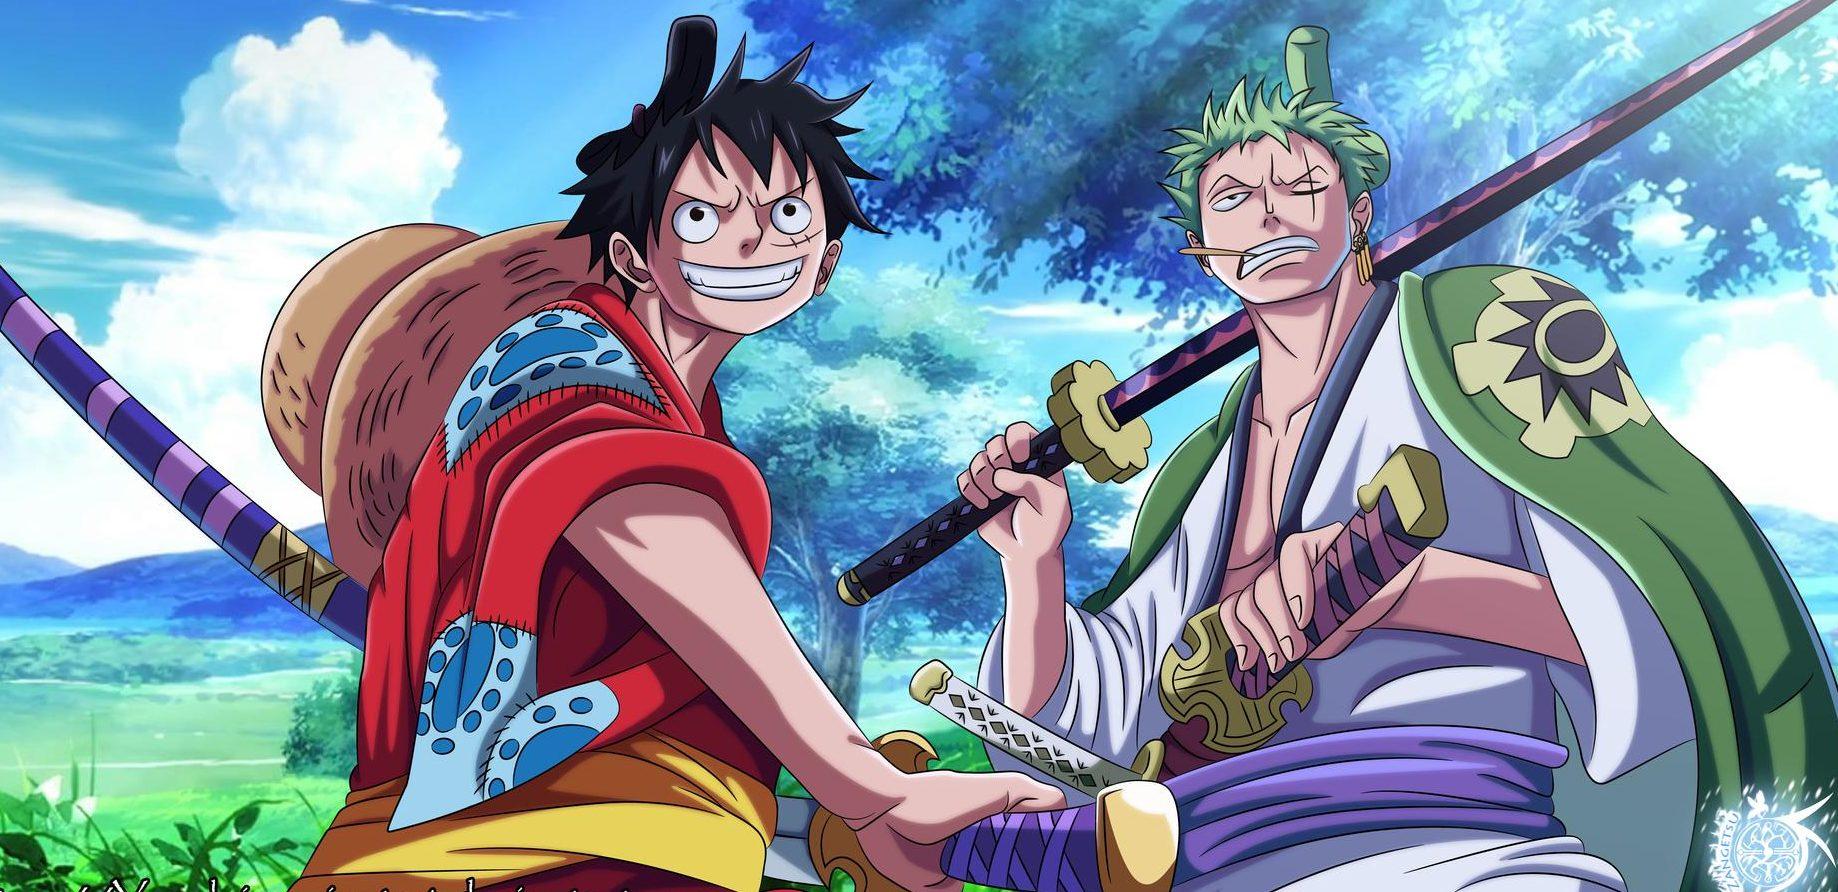 One Piece Episode 901: Titles, Release Date